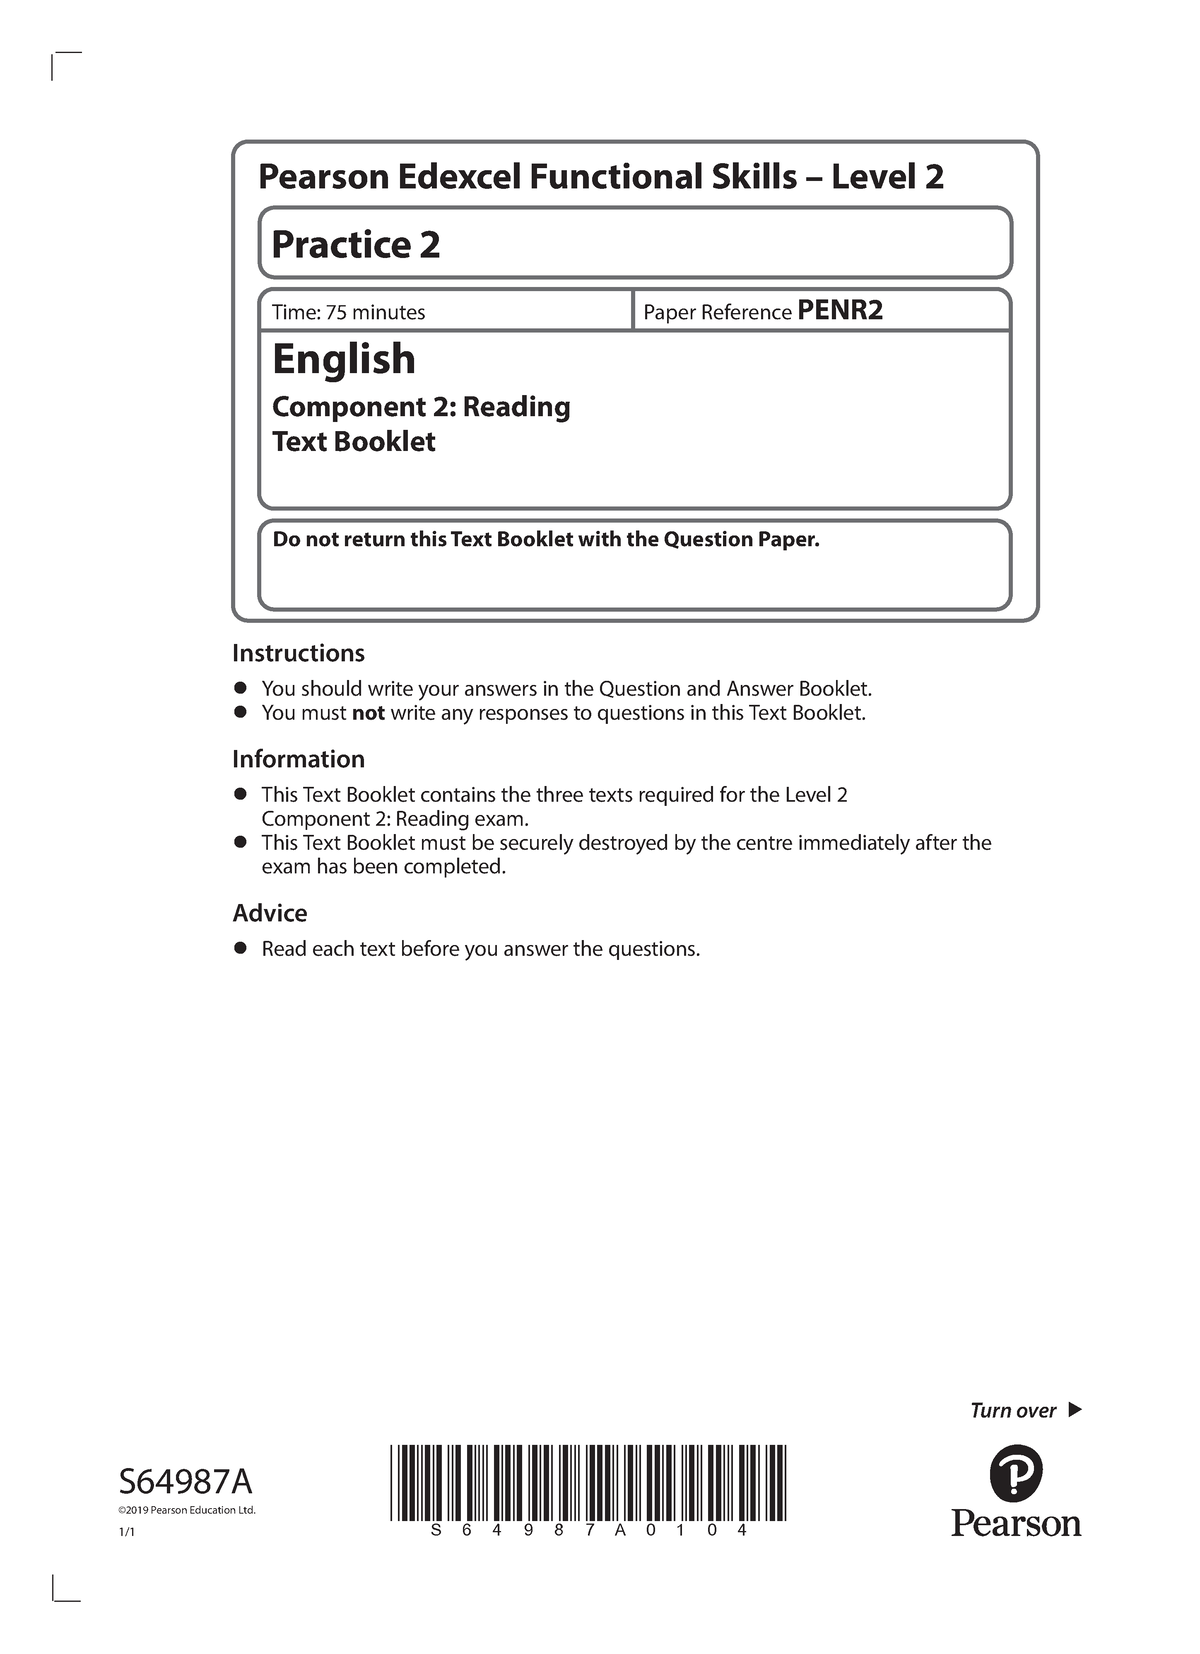 pearson-edexcel-functional-skills-english-level-2-reading-text-booklet-component-2-practice-2